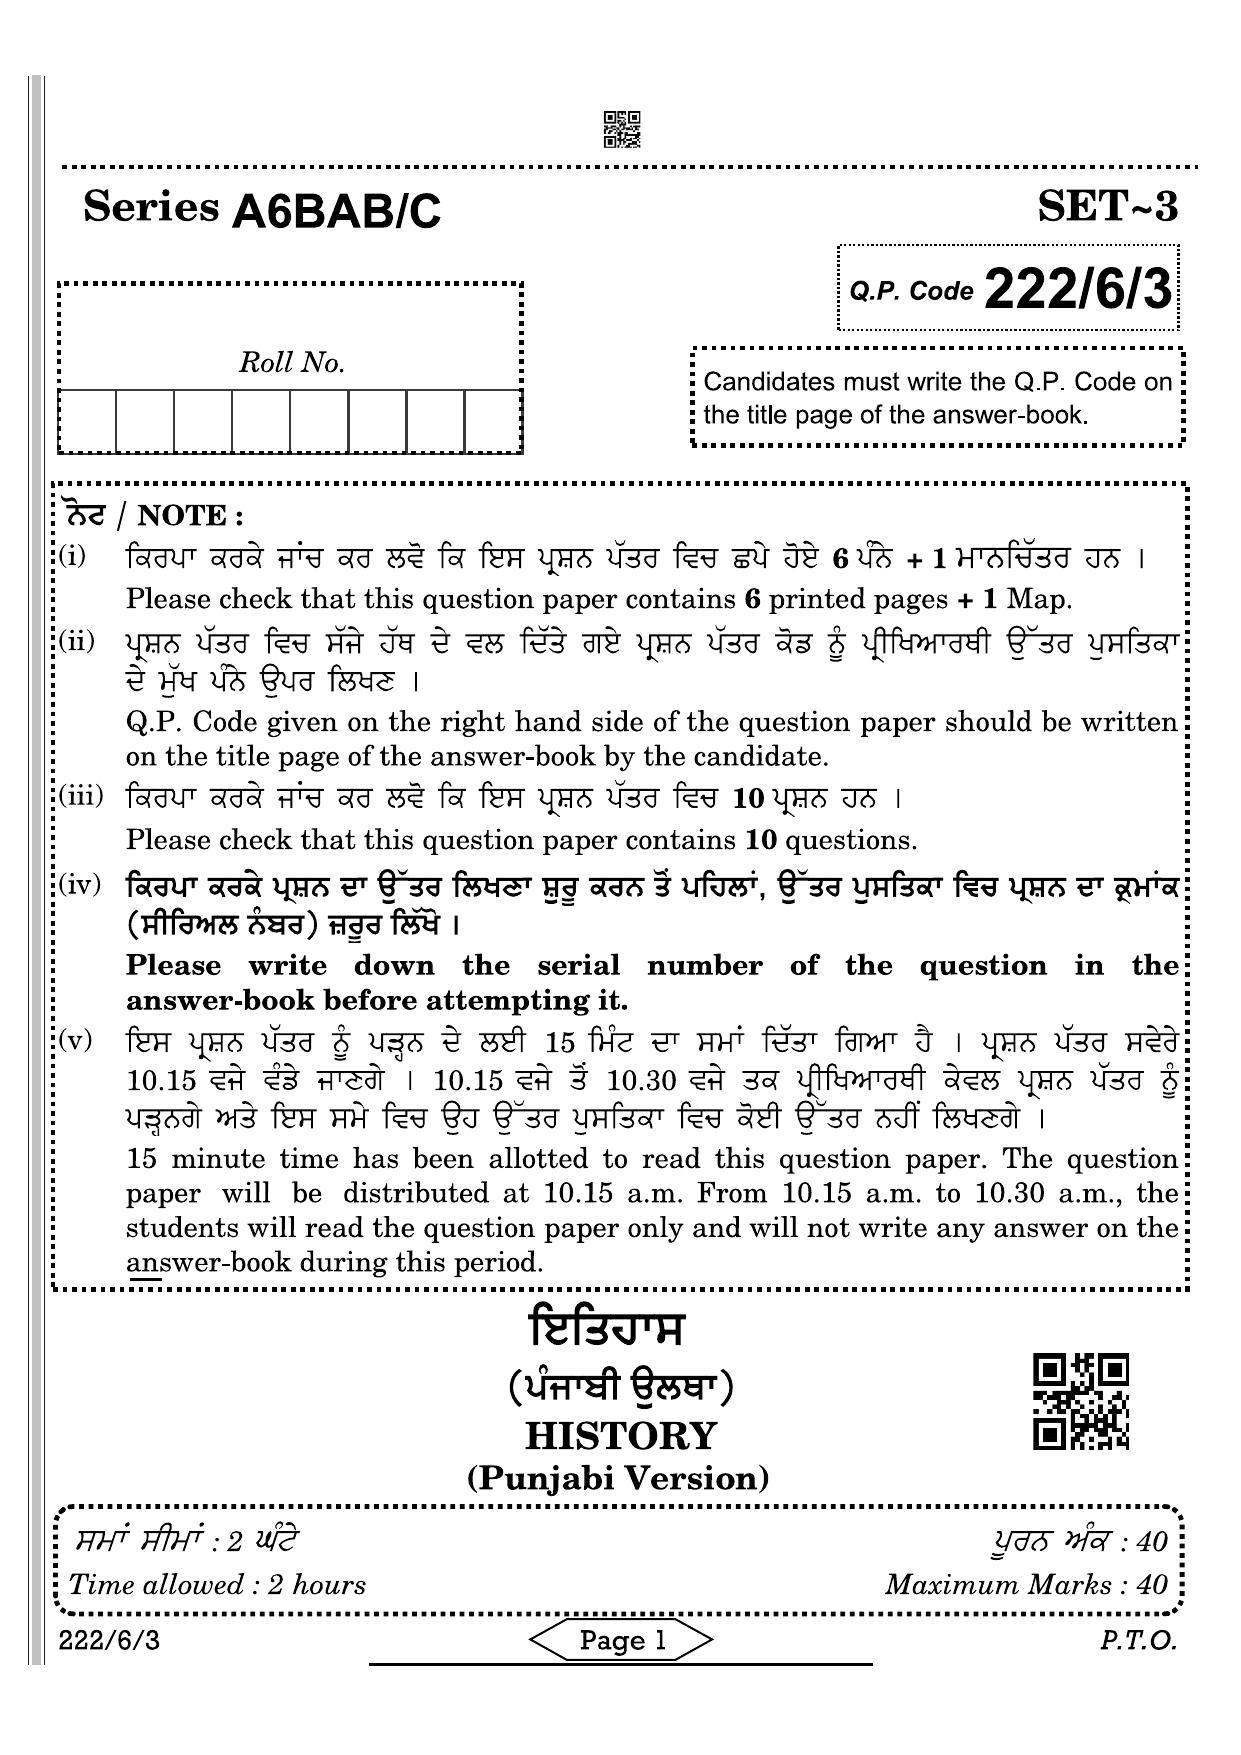 CBSE Class 12 222-6-3 History Punjabi 2022 Compartment Question Paper - Page 1